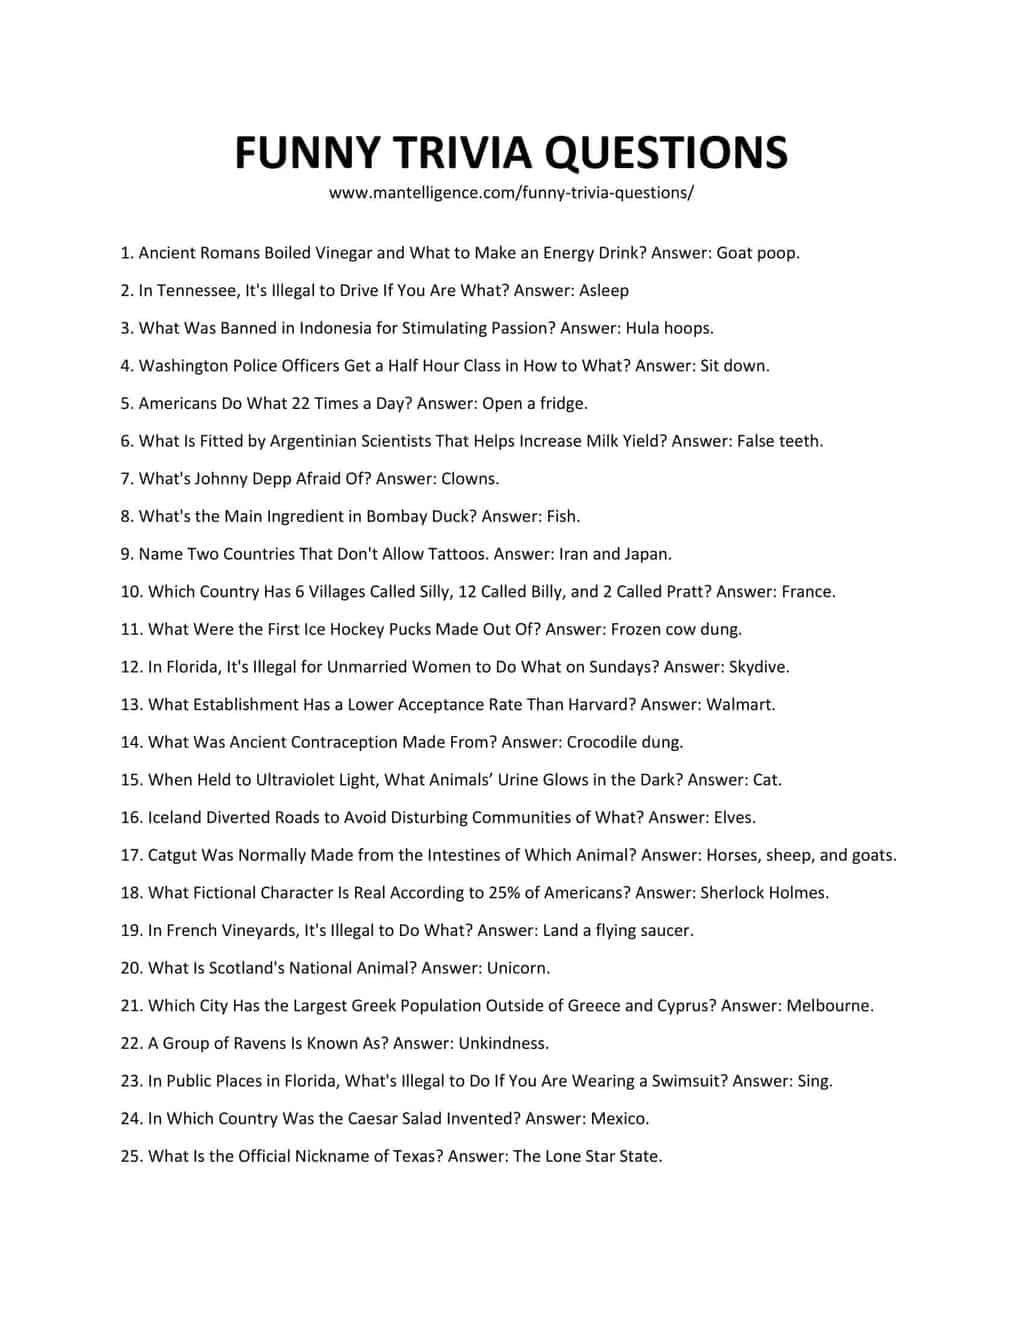 Downloadable and Printable List of Funny Trivia Questions